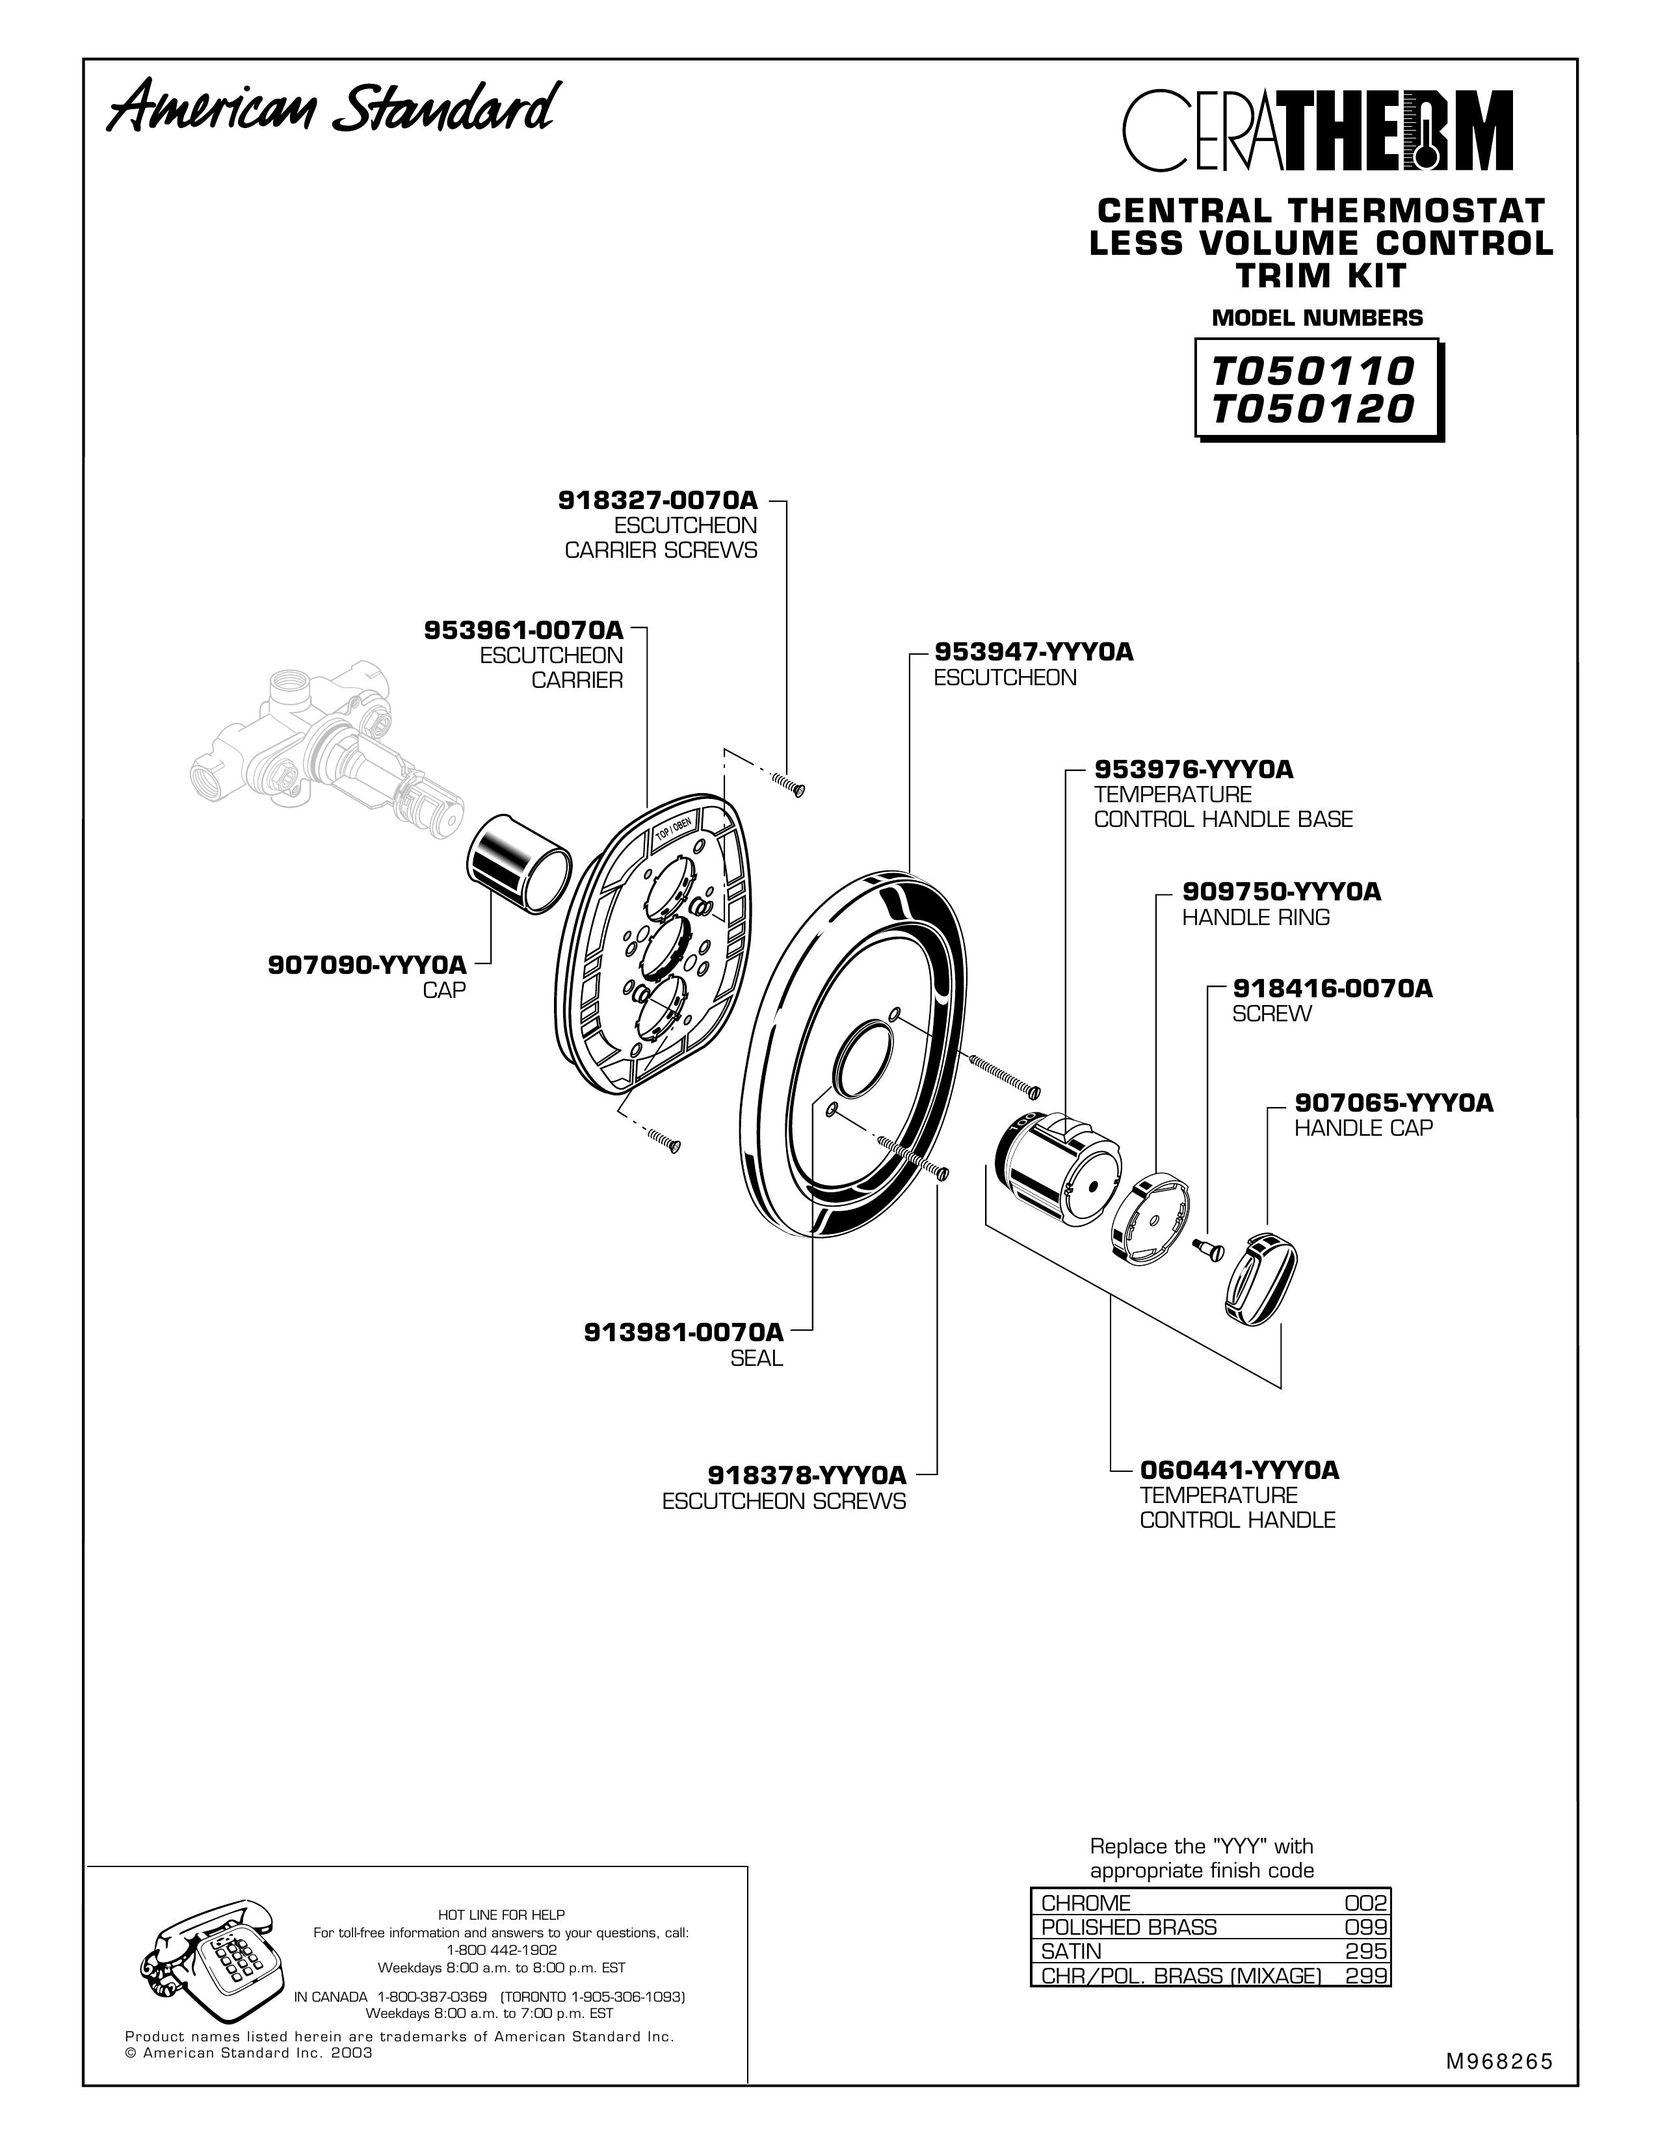 American Standard T050120 Thermostat User Manual